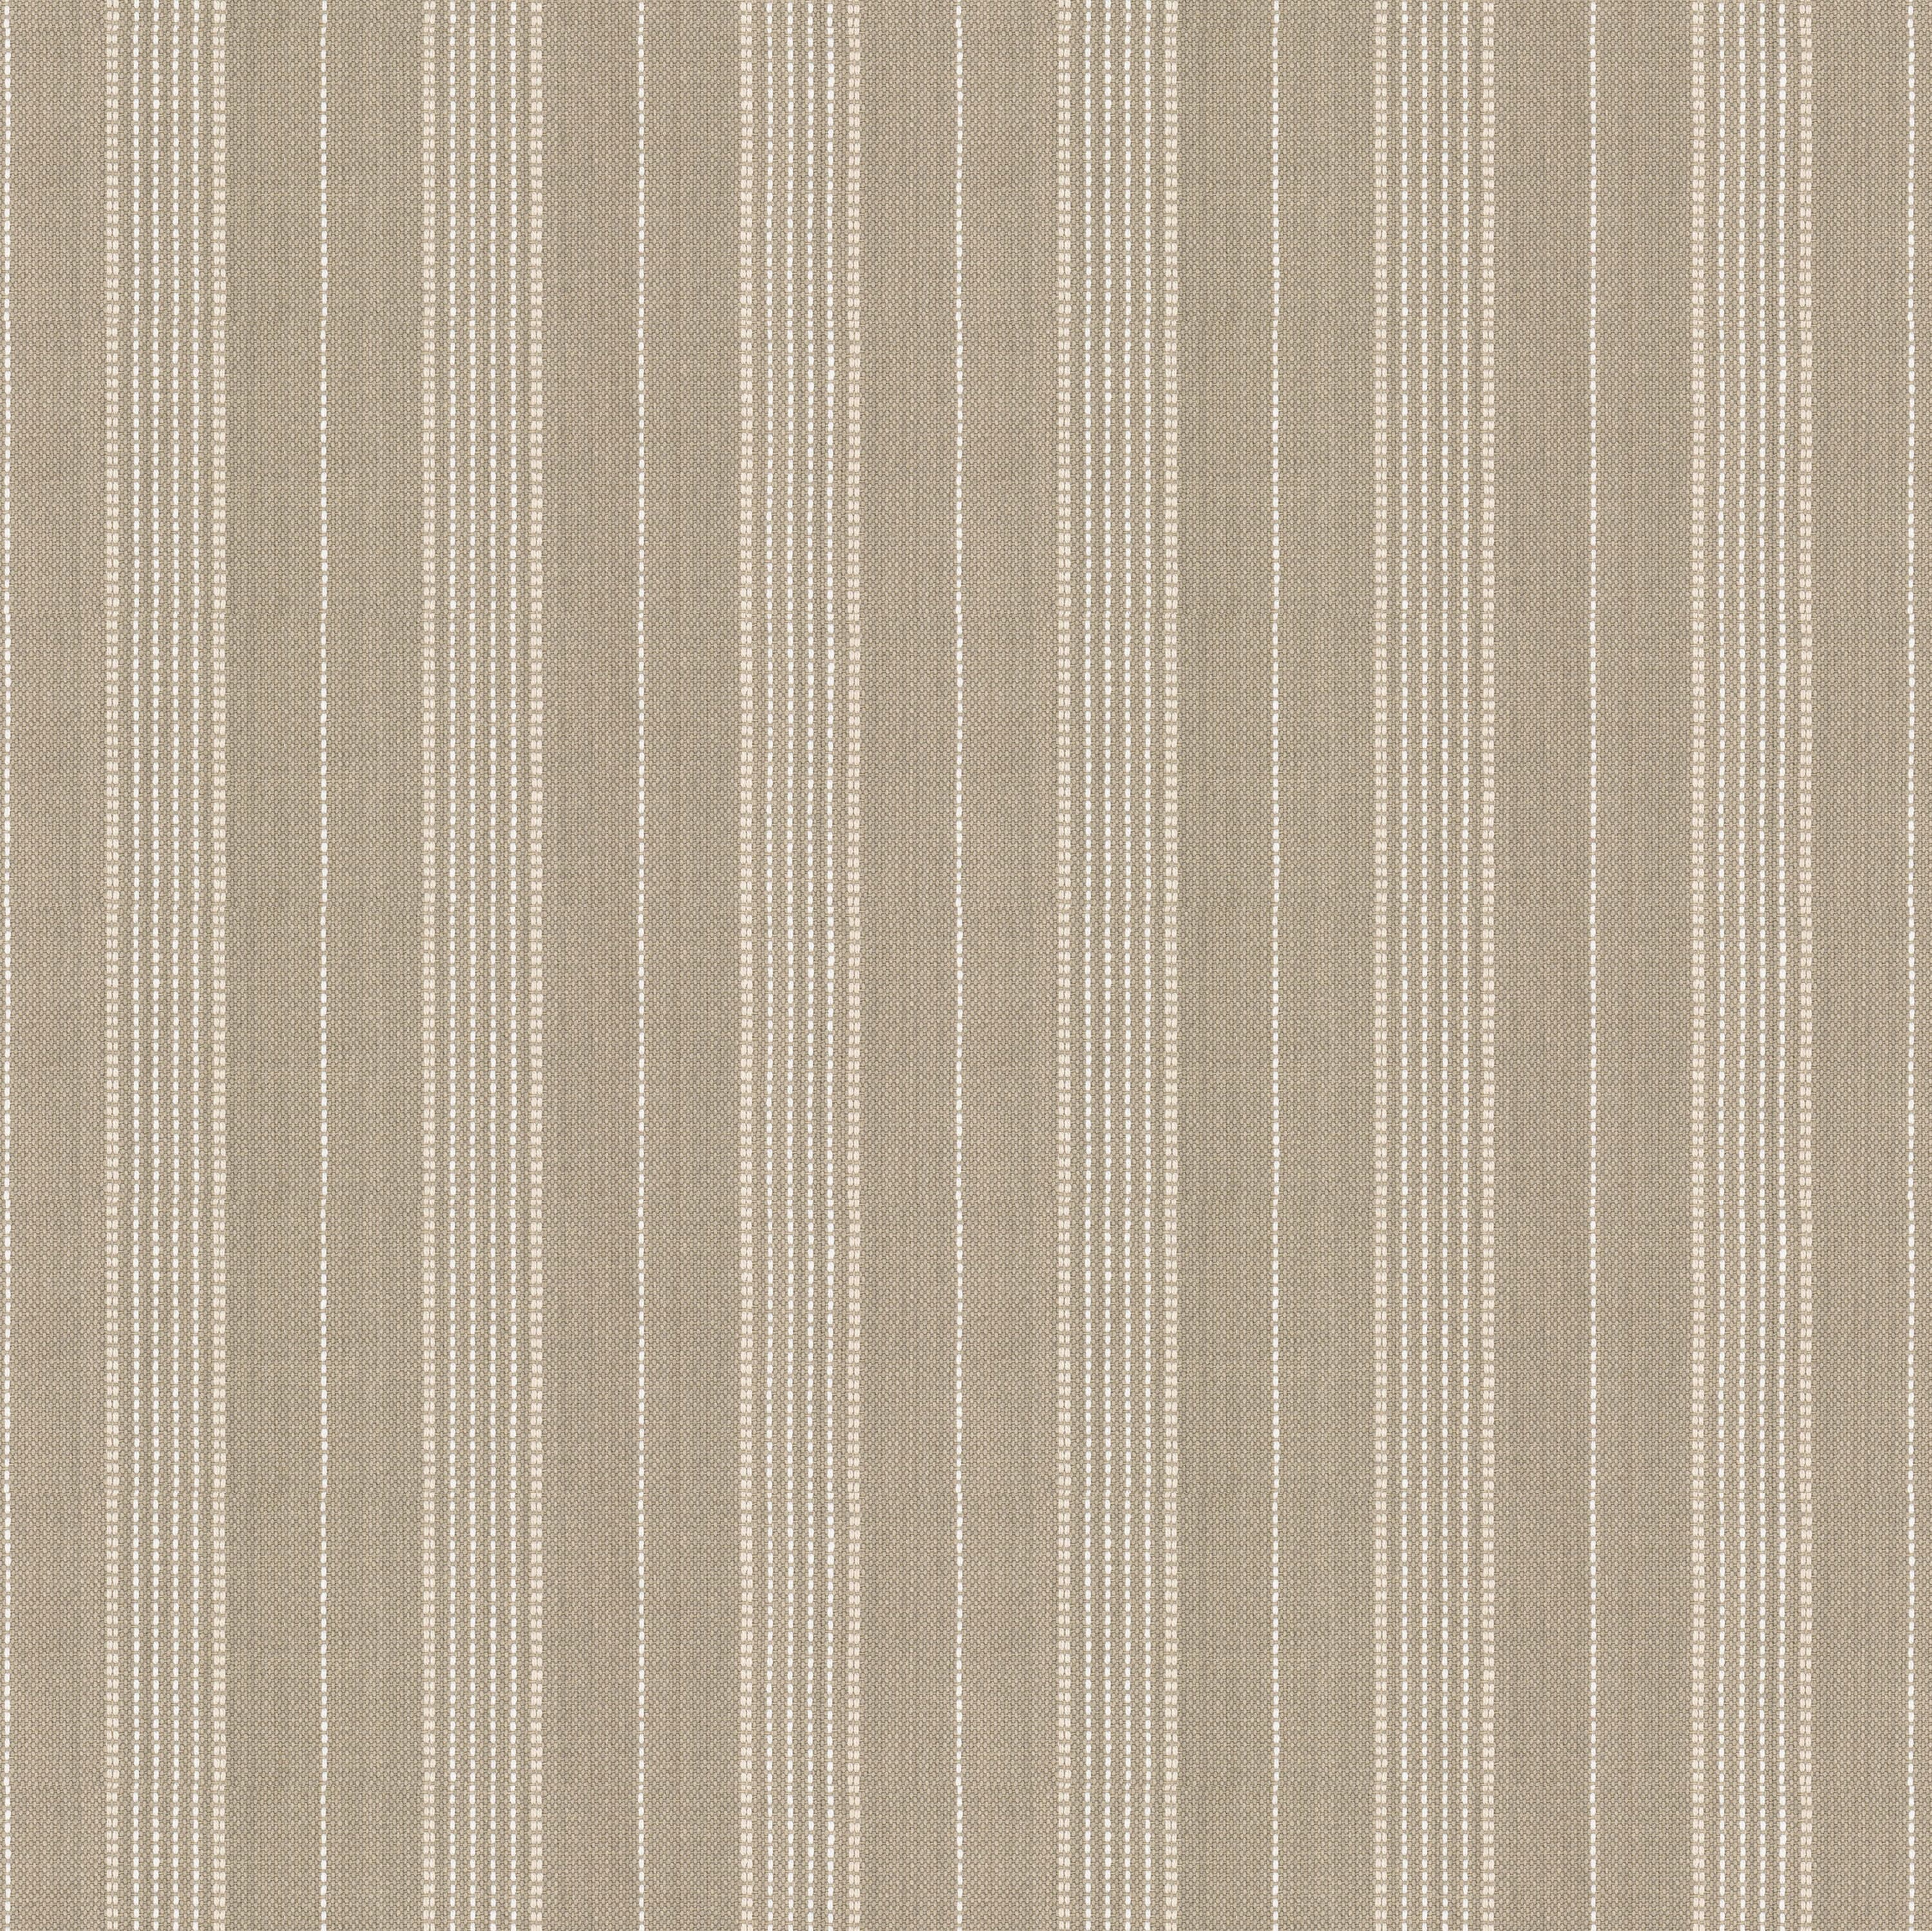 Meeting 4 Taupe by Stout Fabric